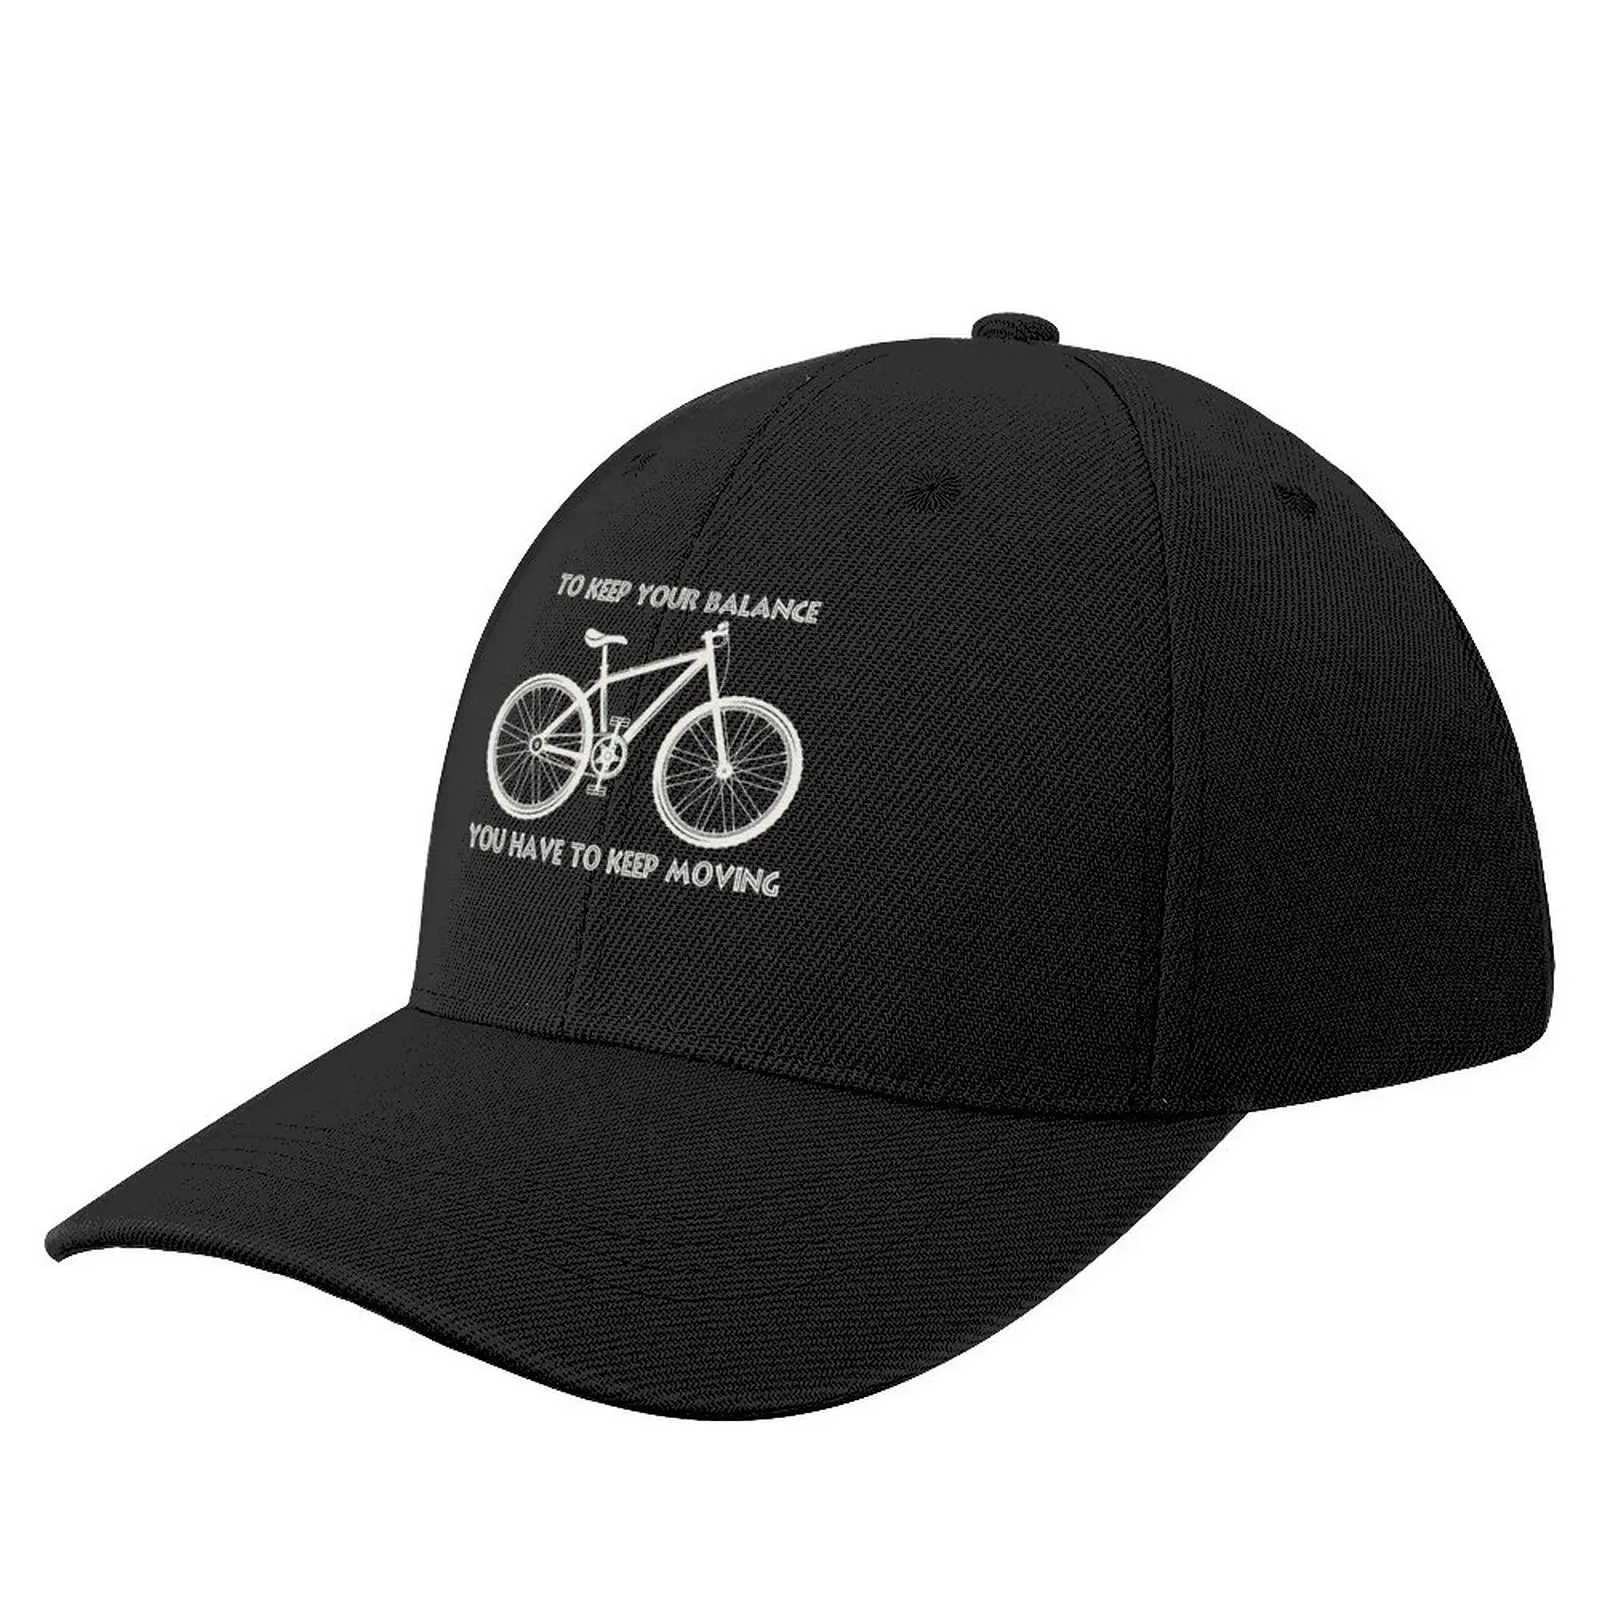 

To Keep Your Balance You Have To Keep Moving I Mountainbike Baseball Cap funny hat Trucker Cap Hood fashionable Hats Man Women's